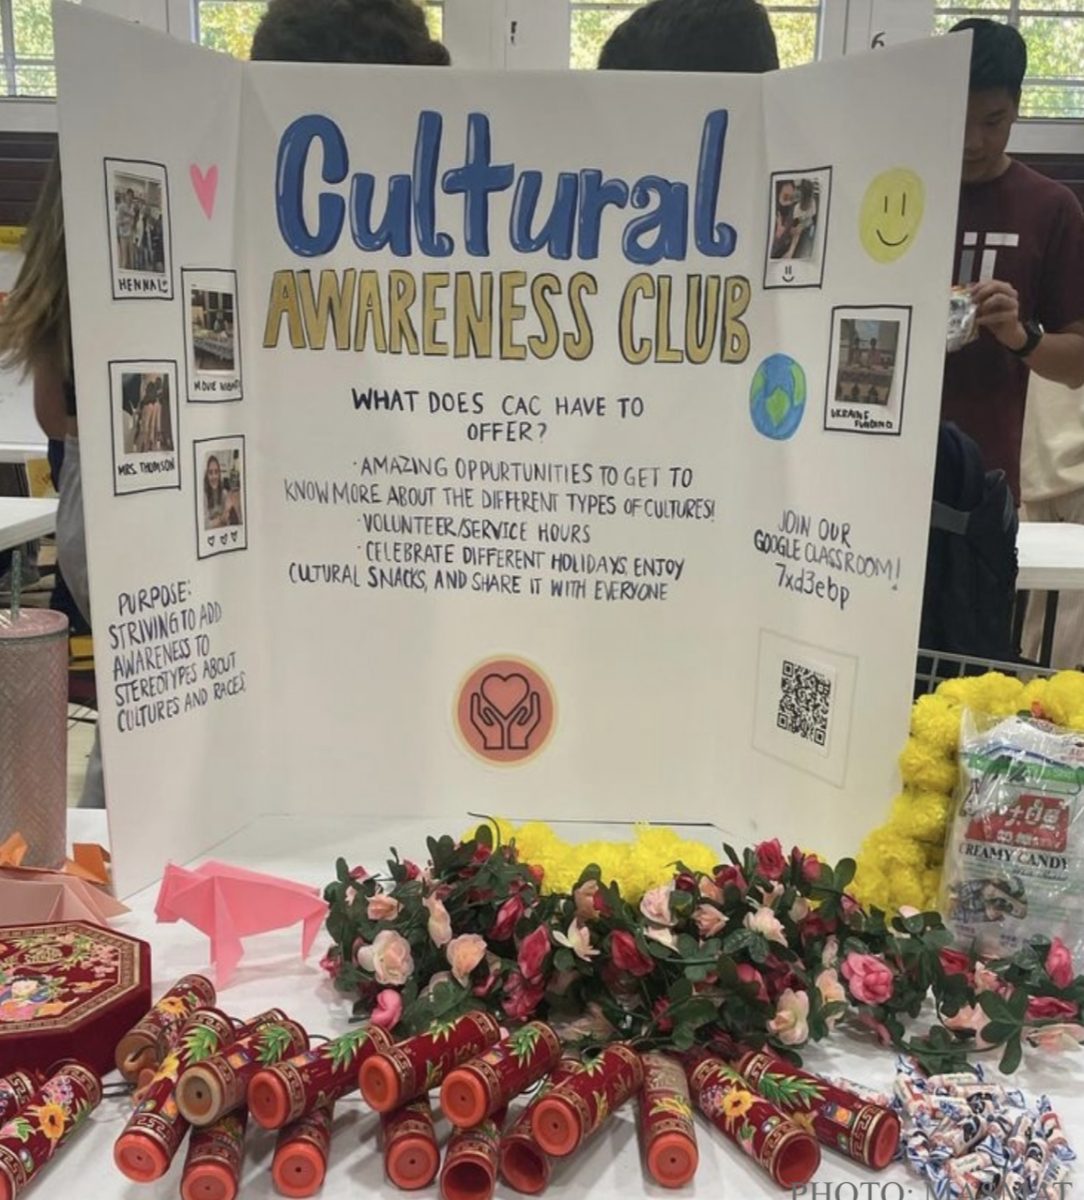 The club aims to connect schools within the ELPS district to raise awareness across the whole community.